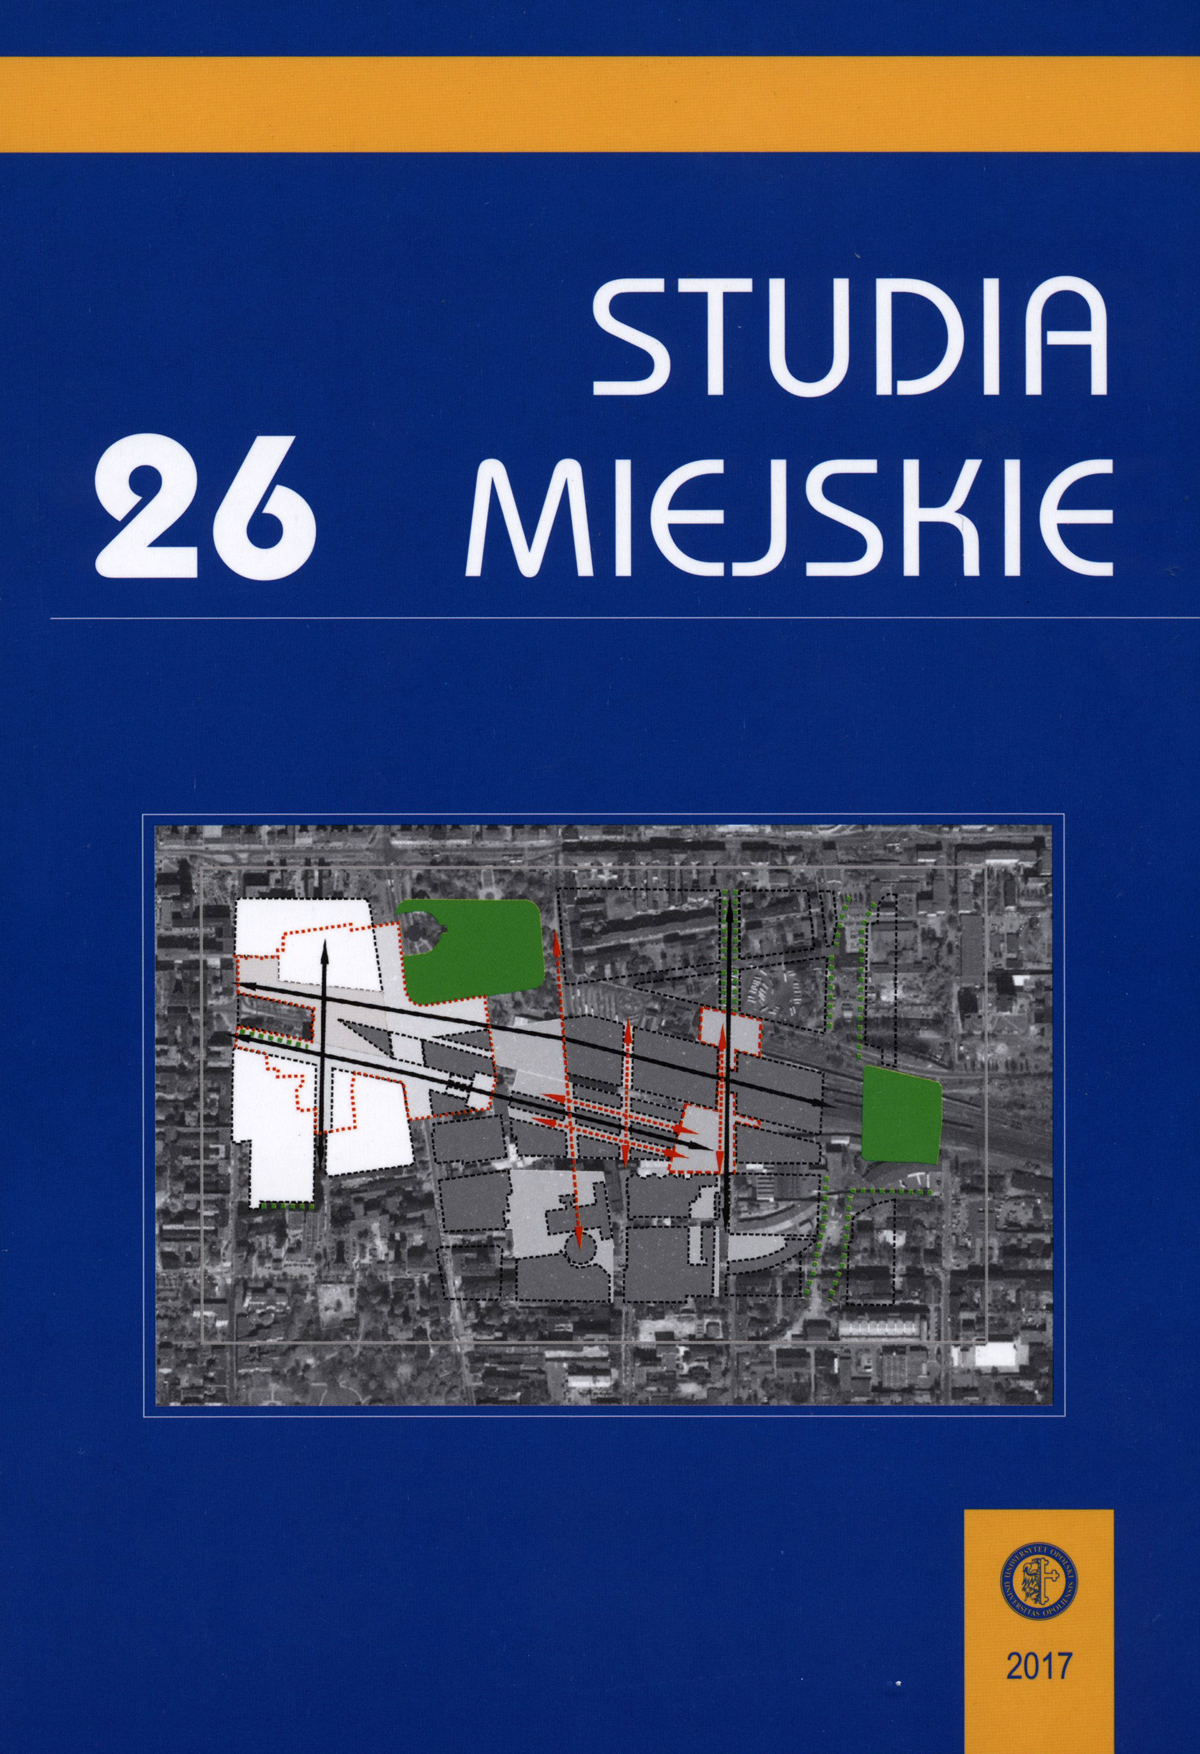 The areas of concentration of unemployment in the space of Łódz Cover Image